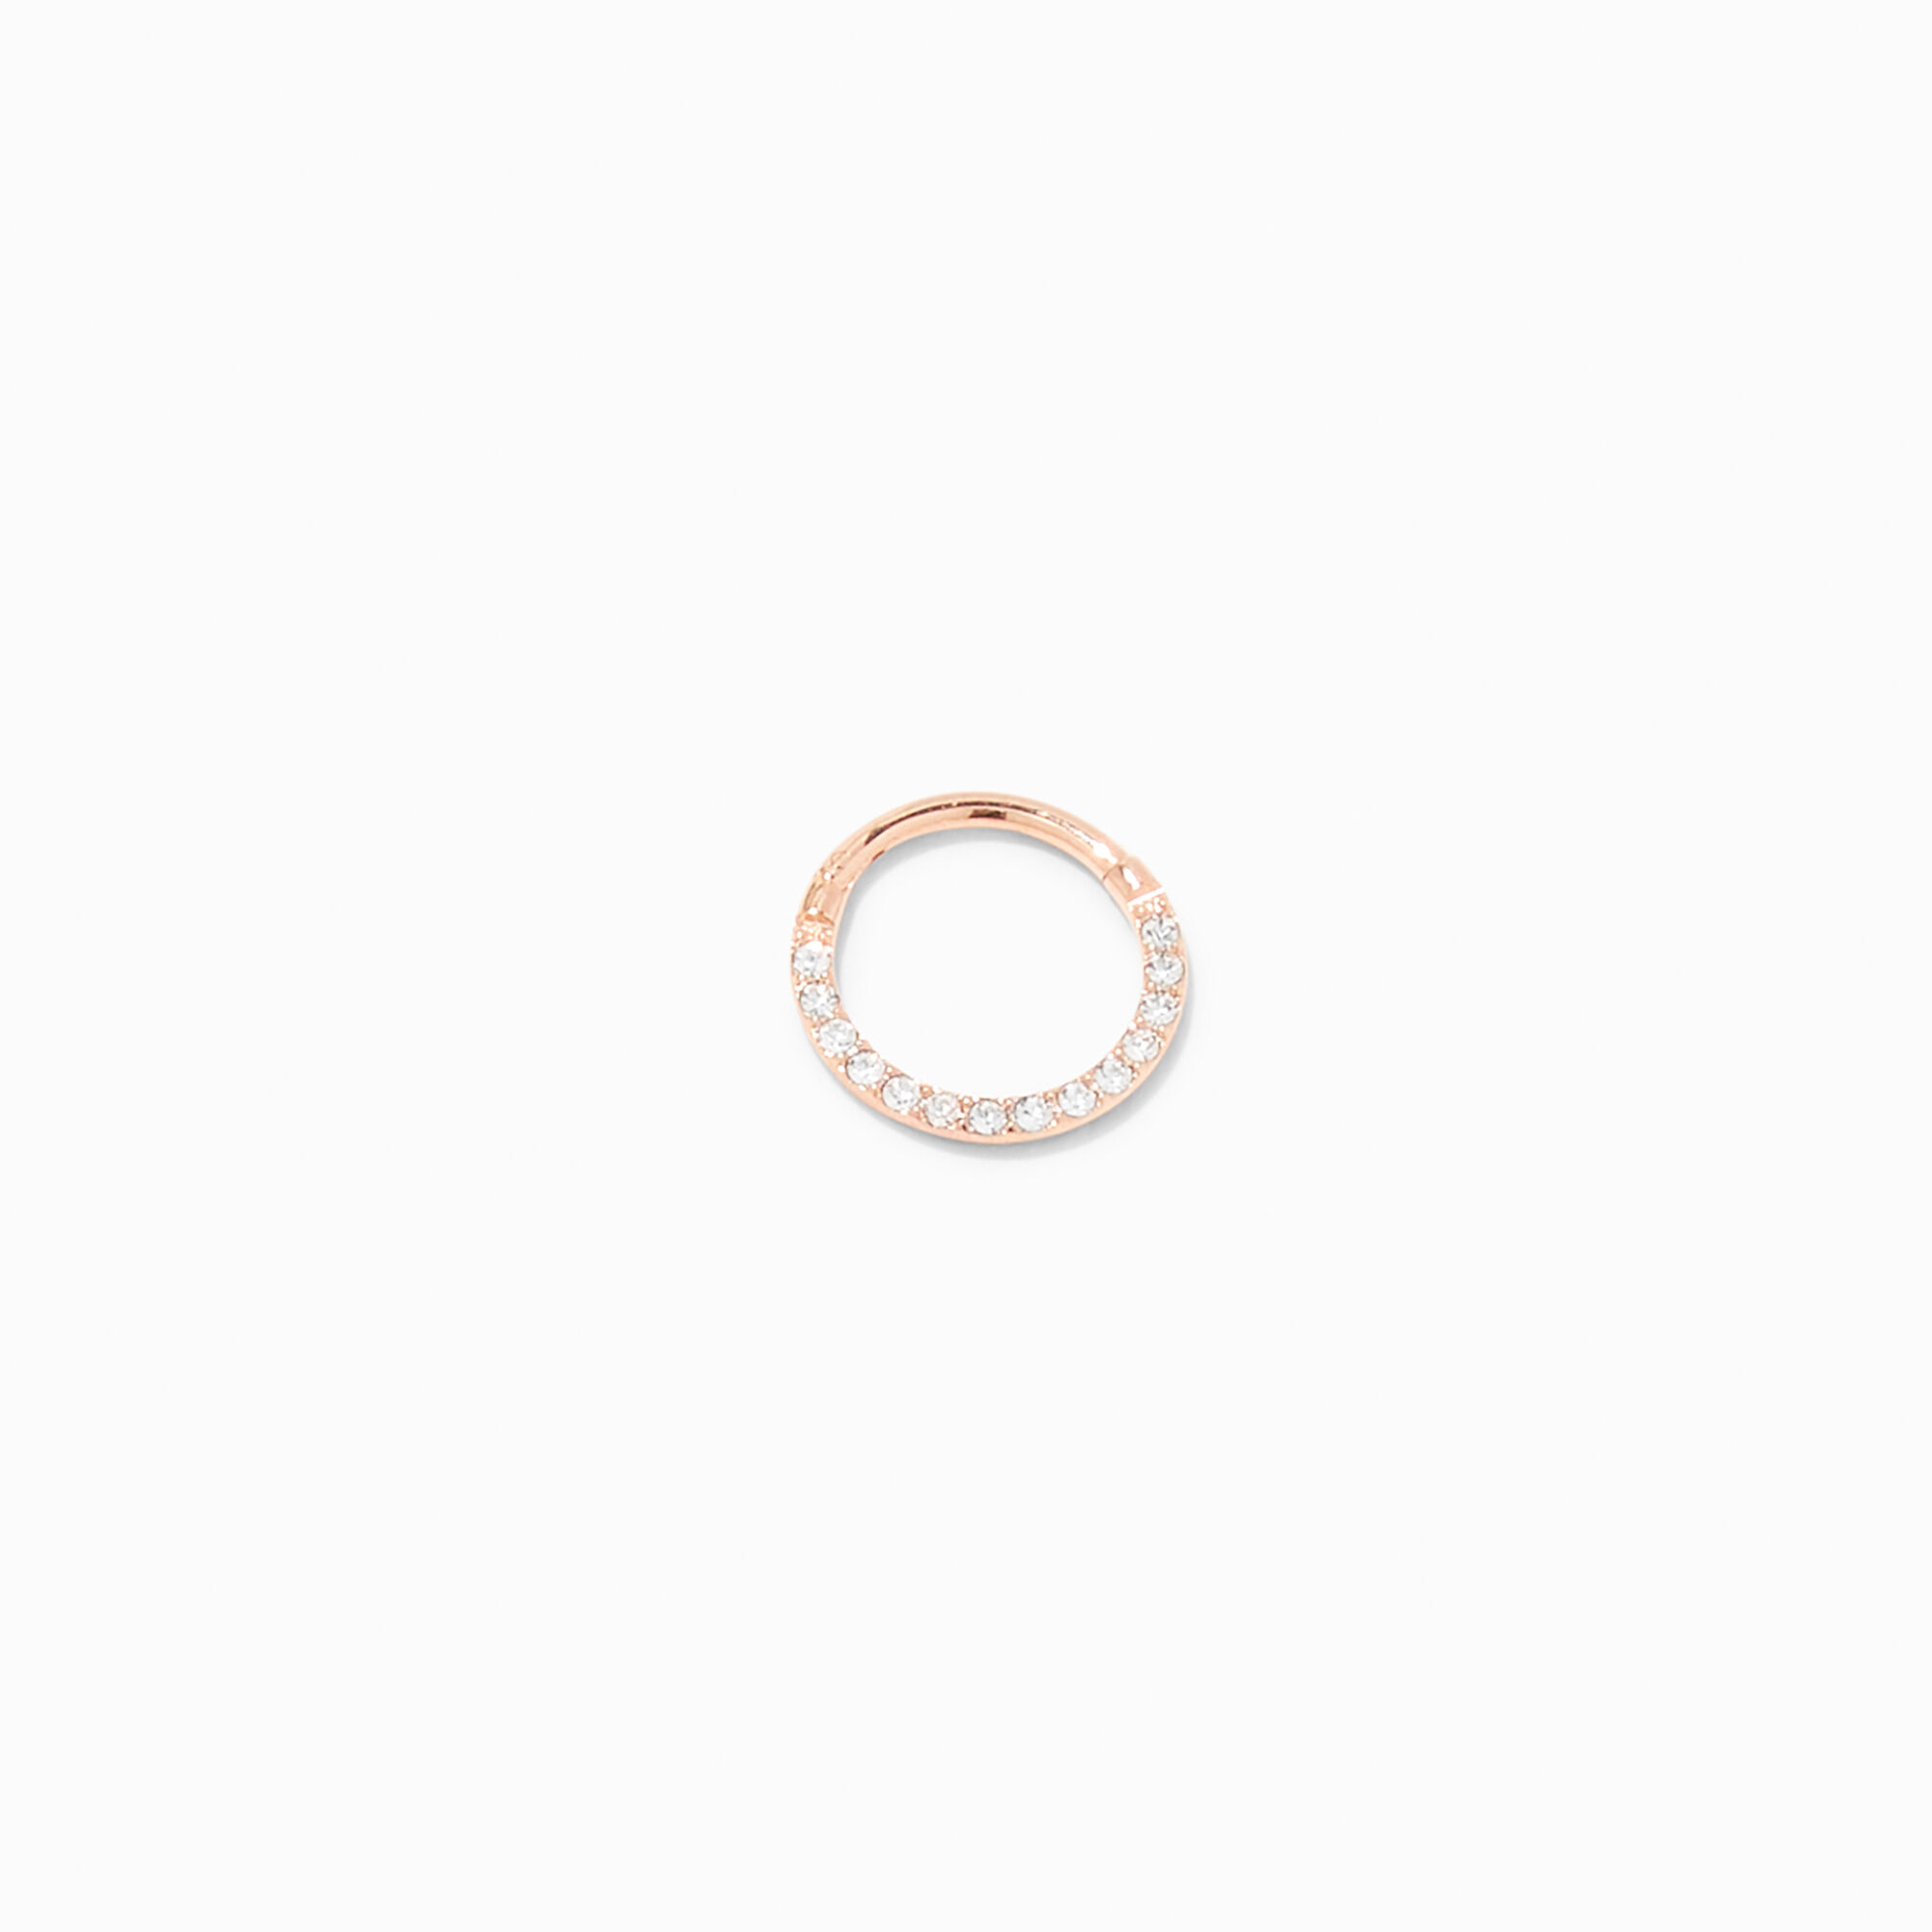 Amazon.com: 6mm Cartilage Helix Tragus Nose Small Gold Huggie Hoop Earrings  for Women,22 Gauge : Handmade Products